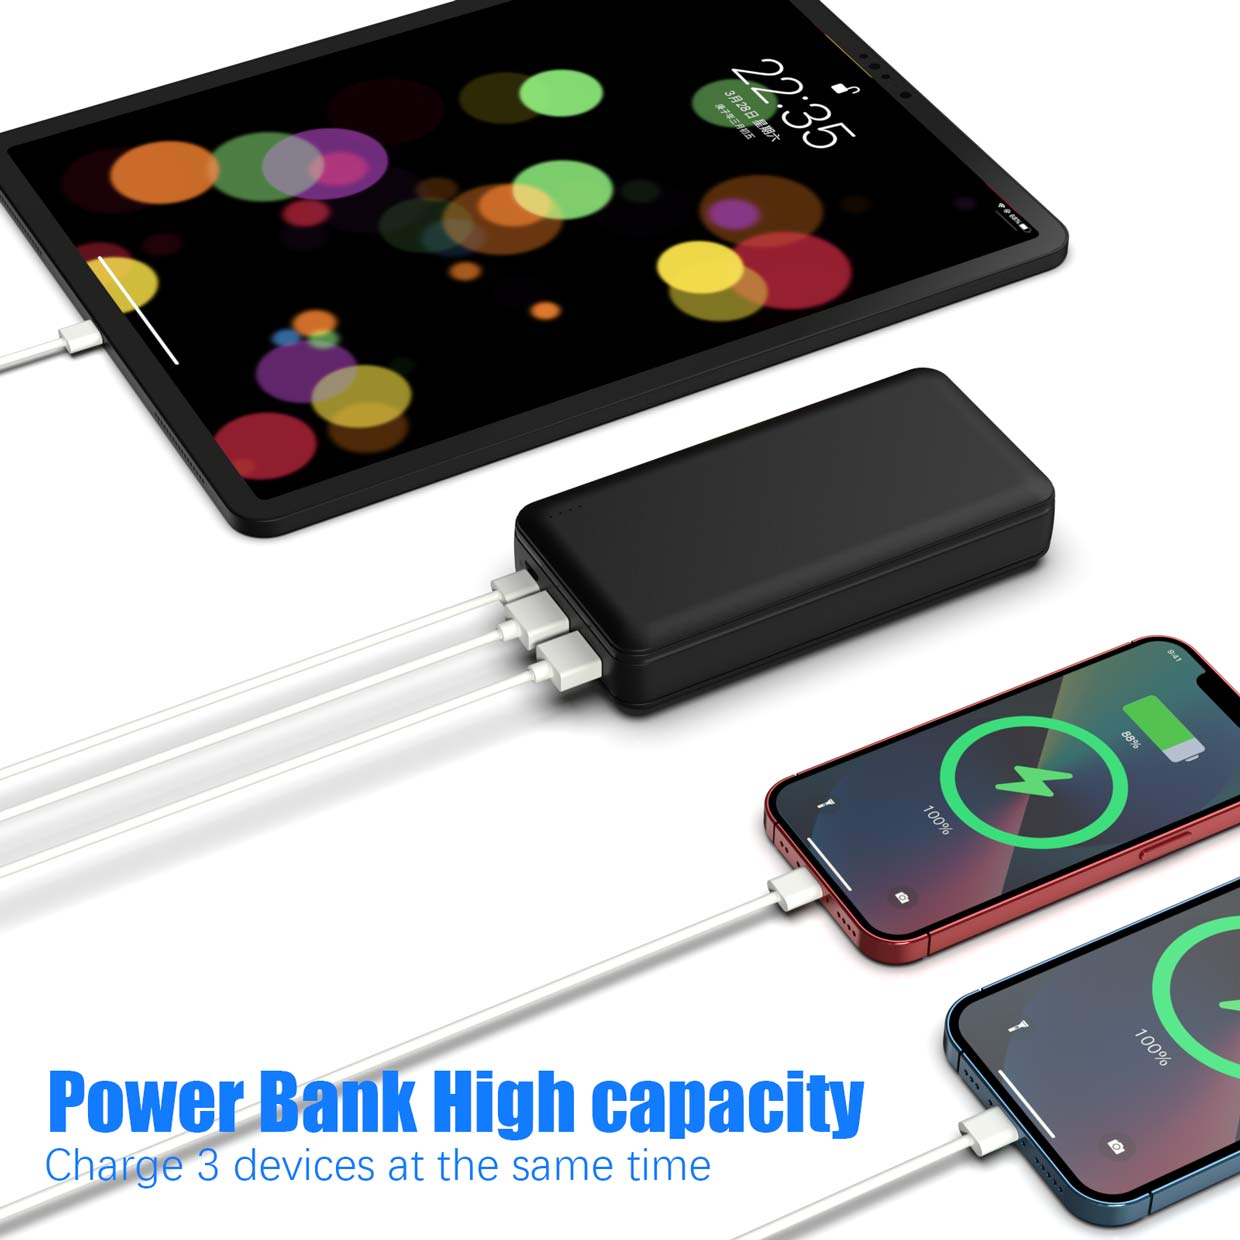 Power Bank, 26800mAh Phone Portable Charger, External Battery Pack, Fast charging  For iphone, ipad, Samsung, Huawei, Smartphones etc.